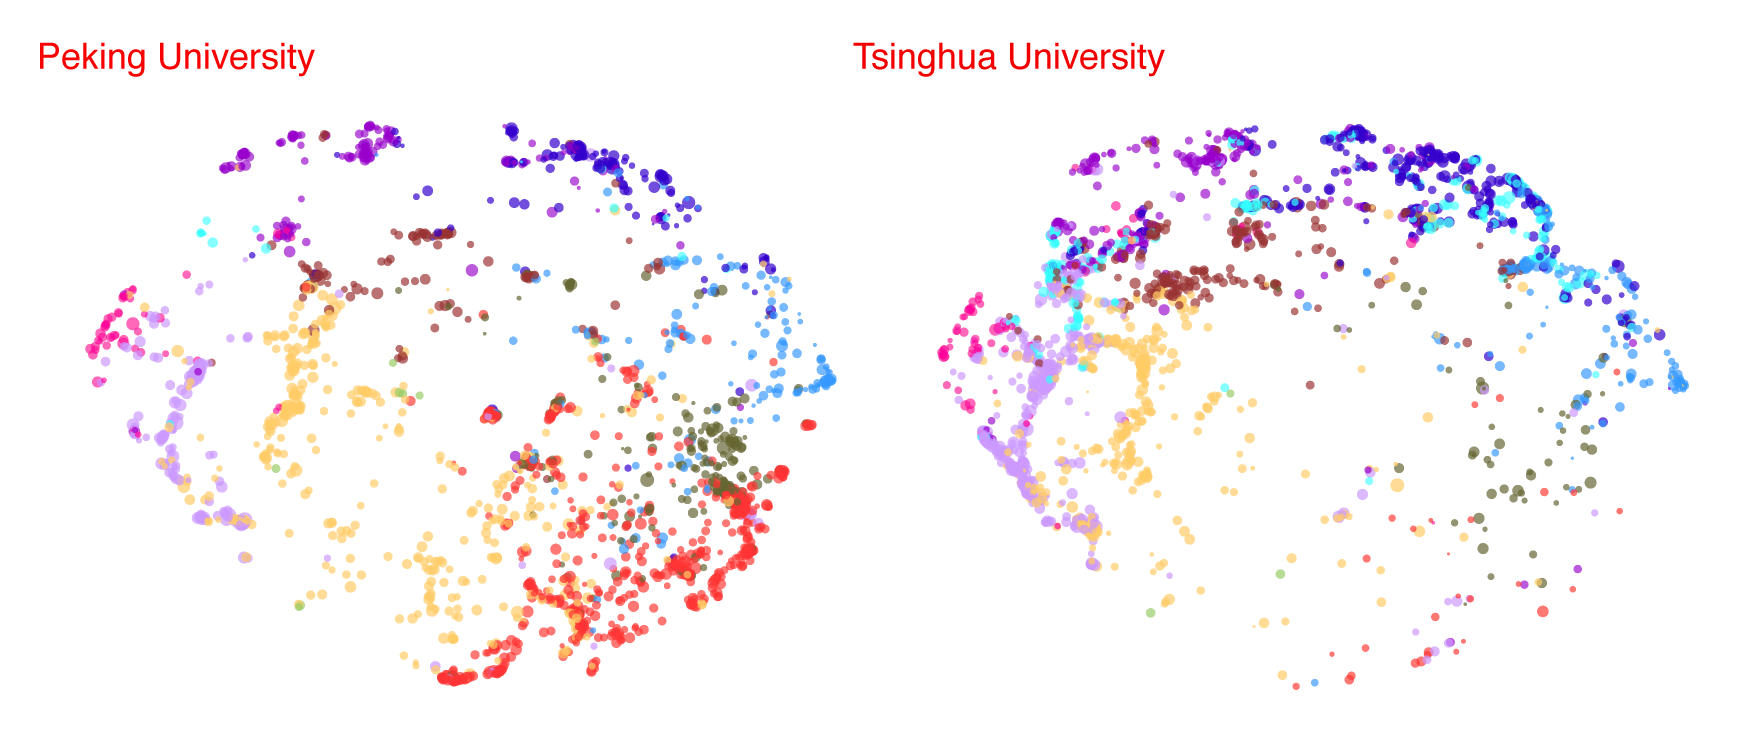 Two screen captures of the Map of Science side by side. They display different distributions of colorful dots in space. The map corresponding to Peking University is on the left, and the map corresponding to Tsinghua University is on the right.